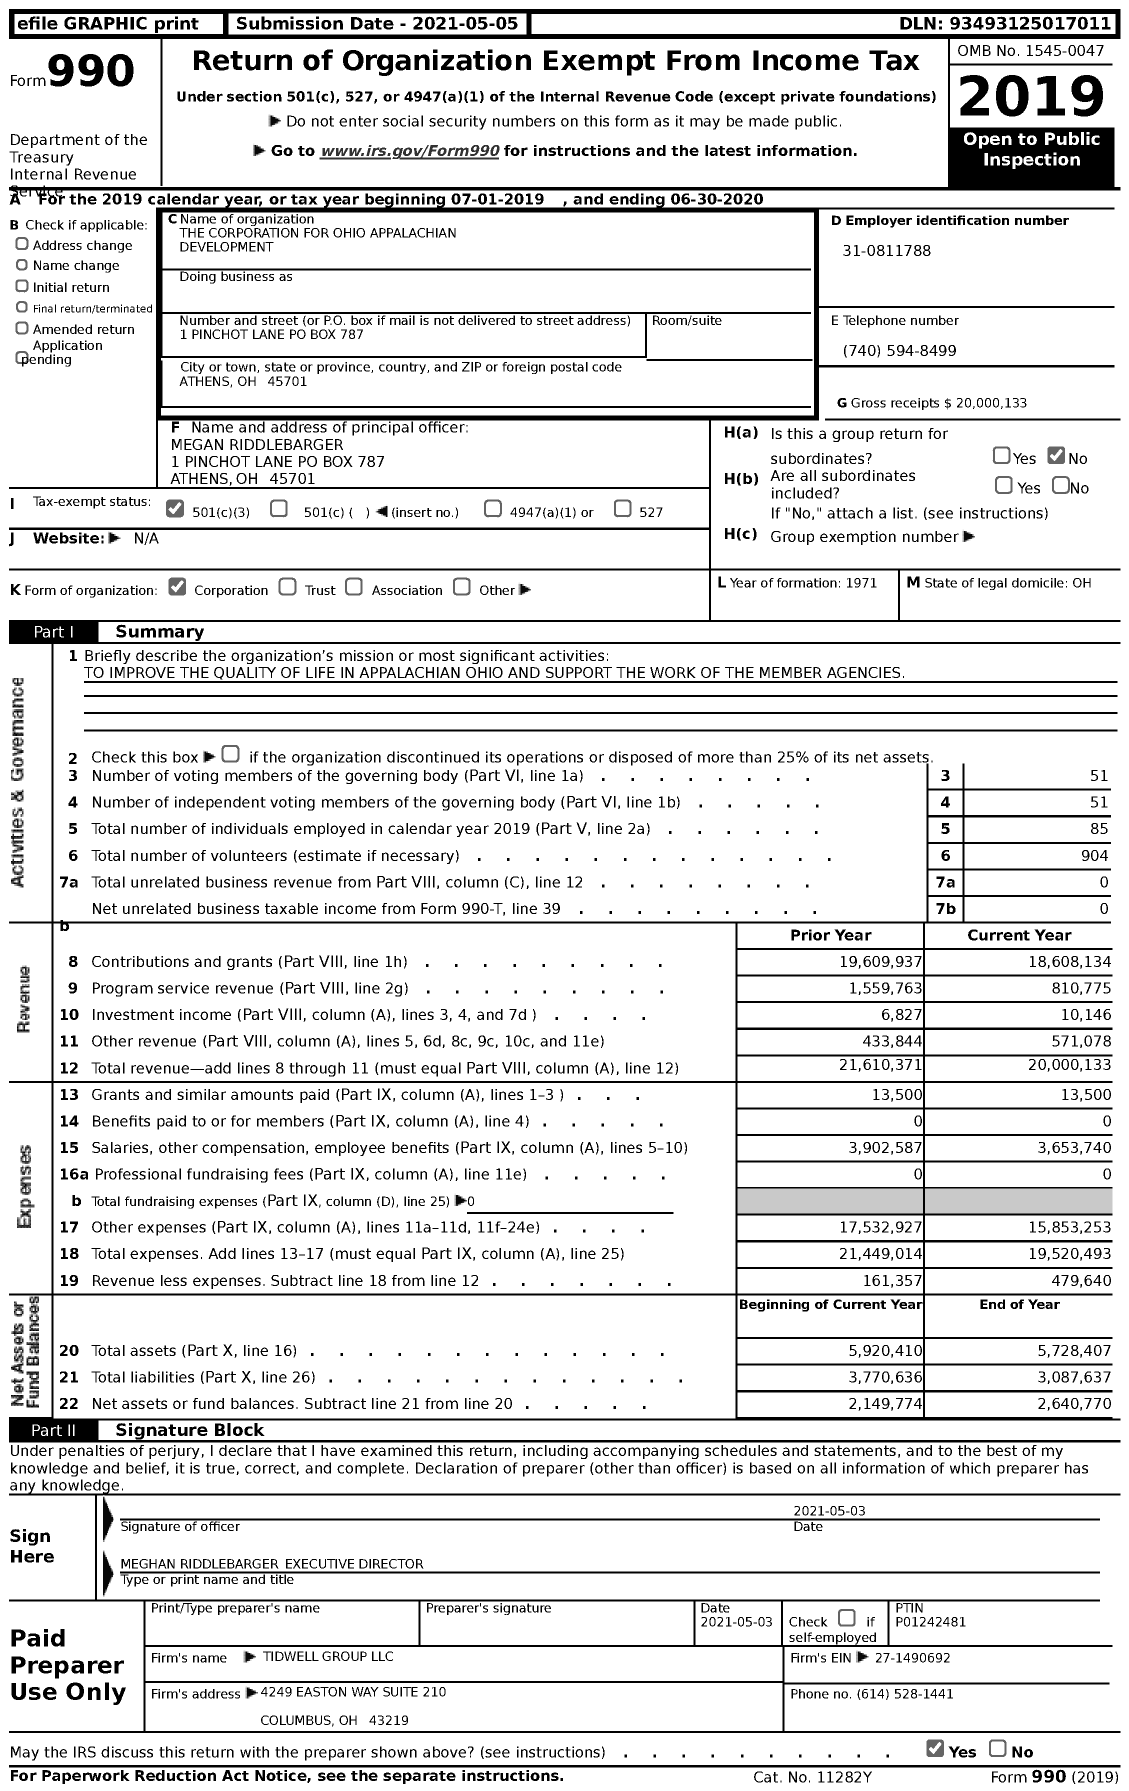 Image of first page of 2019 Form 990 for The Corporation for Ohio Appalachian Development (COAD)